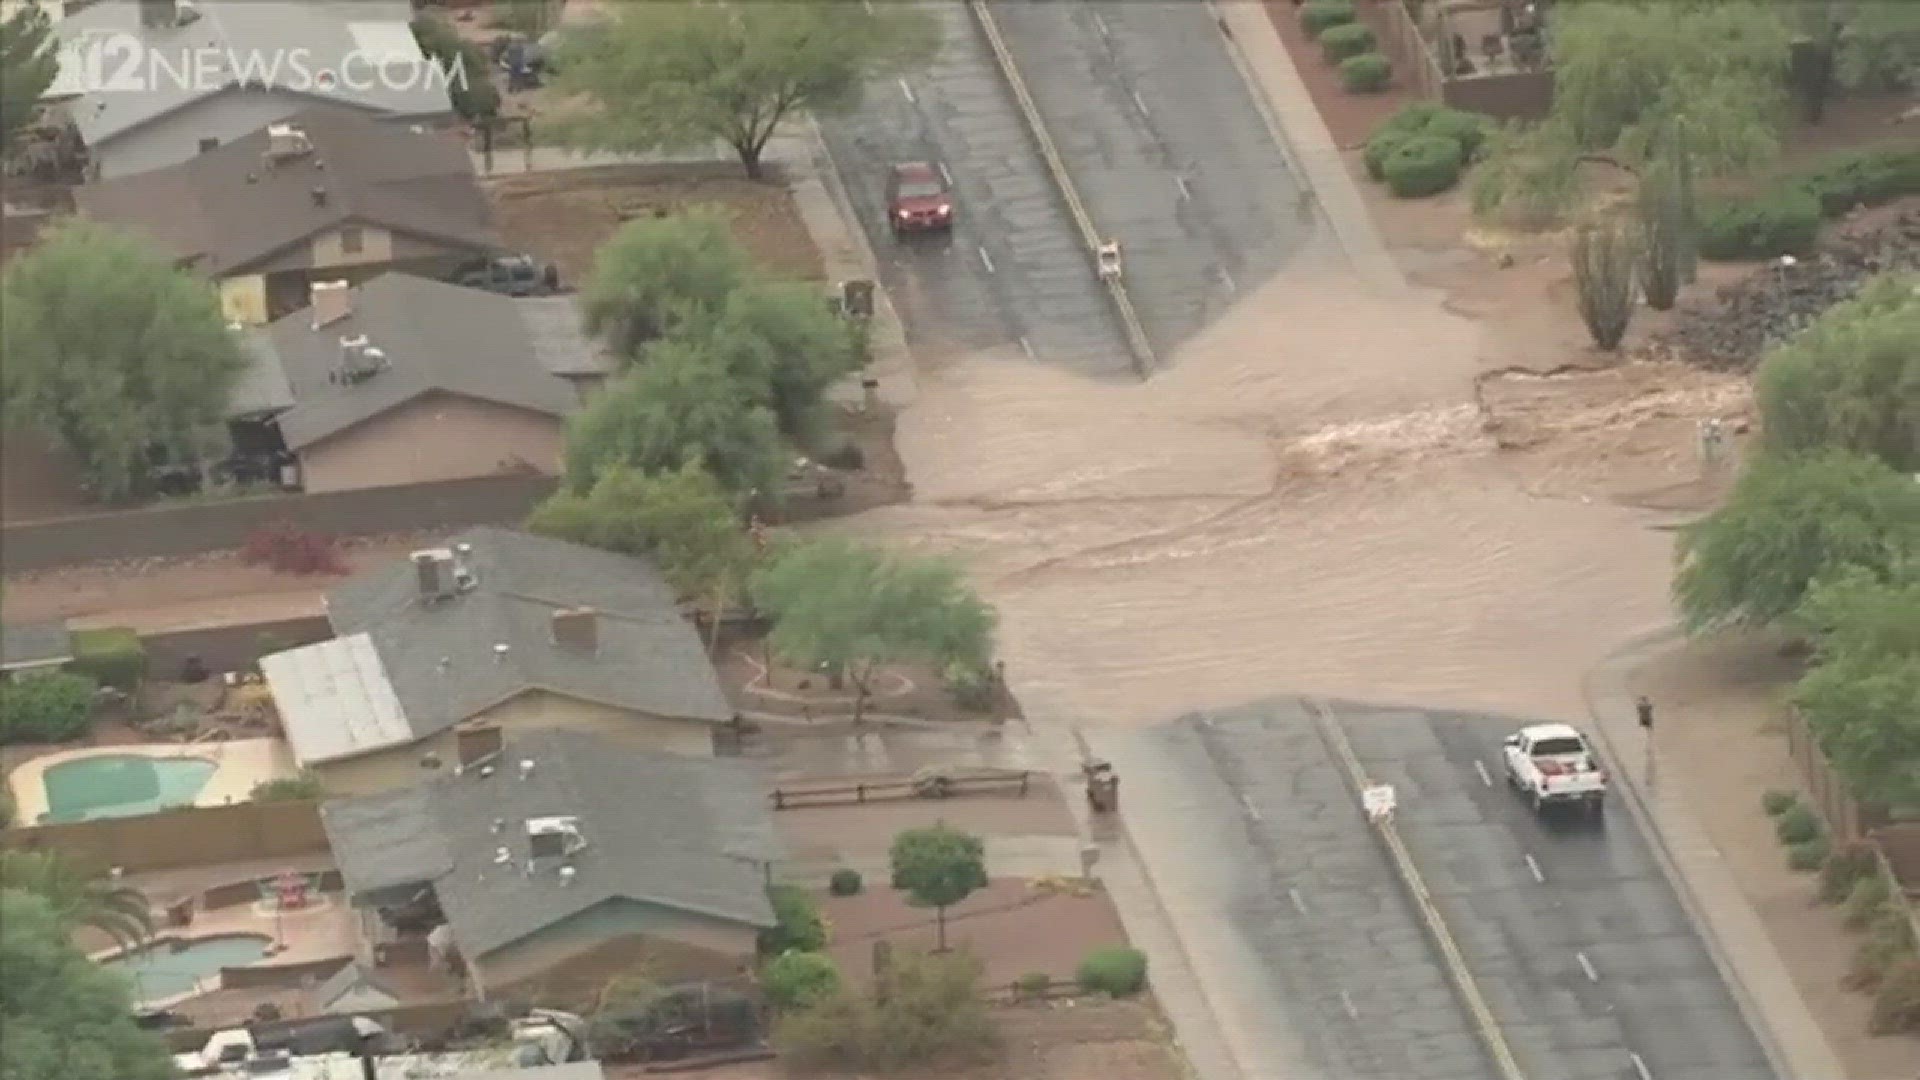 Chopper captured footage of flooding and cars stranded in the East Valley area Monday morning.